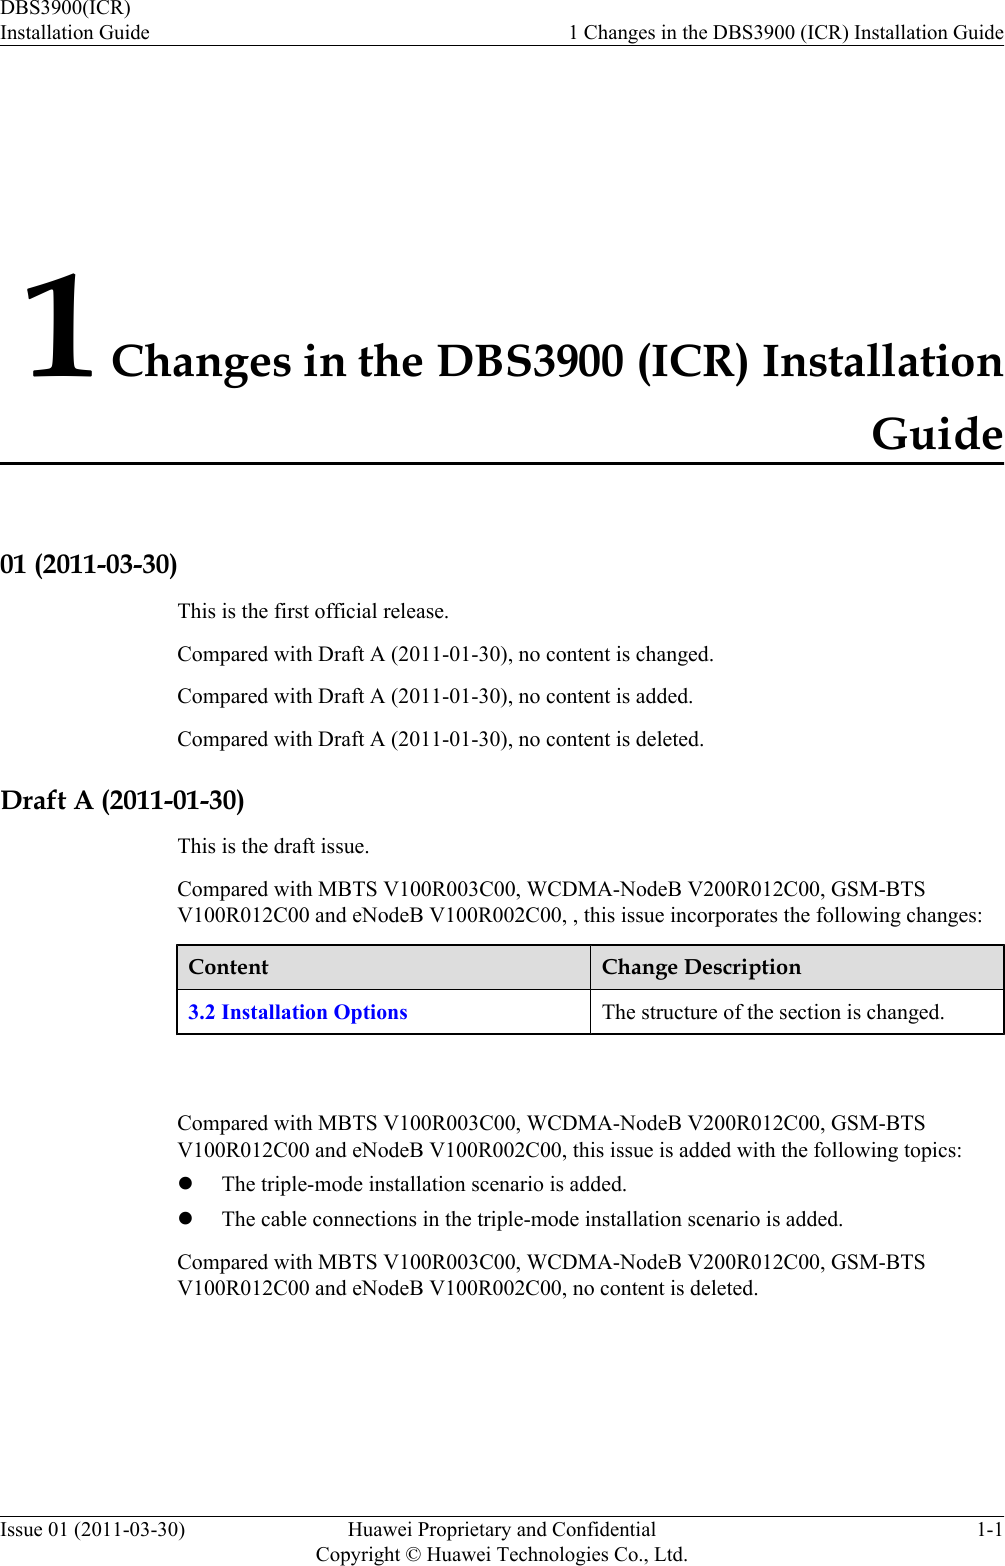 1 Changes in the DBS3900 (ICR) InstallationGuide01 (2011-03-30)This is the first official release.Compared with Draft A (2011-01-30), no content is changed.Compared with Draft A (2011-01-30), no content is added.Compared with Draft A (2011-01-30), no content is deleted.Draft A (2011-01-30)This is the draft issue.Compared with MBTS V100R003C00, WCDMA-NodeB V200R012C00, GSM-BTSV100R012C00 and eNodeB V100R002C00, , this issue incorporates the following changes:Content Change Description3.2 Installation Options The structure of the section is changed. Compared with MBTS V100R003C00, WCDMA-NodeB V200R012C00, GSM-BTSV100R012C00 and eNodeB V100R002C00, this issue is added with the following topics:lThe triple-mode installation scenario is added.lThe cable connections in the triple-mode installation scenario is added.Compared with MBTS V100R003C00, WCDMA-NodeB V200R012C00, GSM-BTSV100R012C00 and eNodeB V100R002C00, no content is deleted.DBS3900(ICR)Installation Guide 1 Changes in the DBS3900 (ICR) Installation GuideIssue 01 (2011-03-30) Huawei Proprietary and ConfidentialCopyright © Huawei Technologies Co., Ltd.1-1